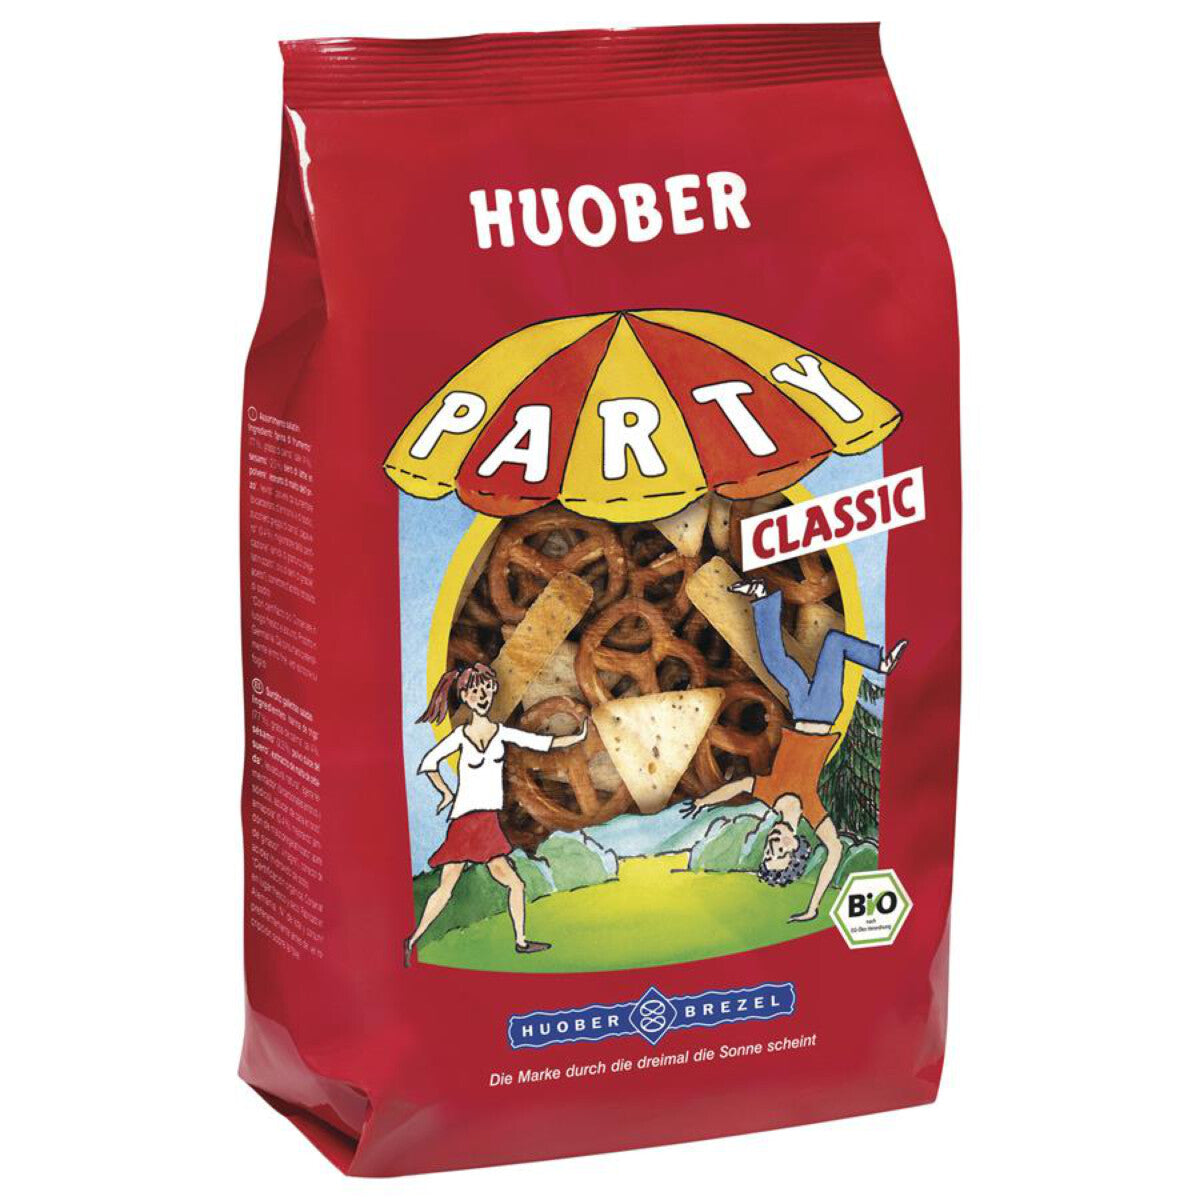 HUOBER Party Classic - 200 g